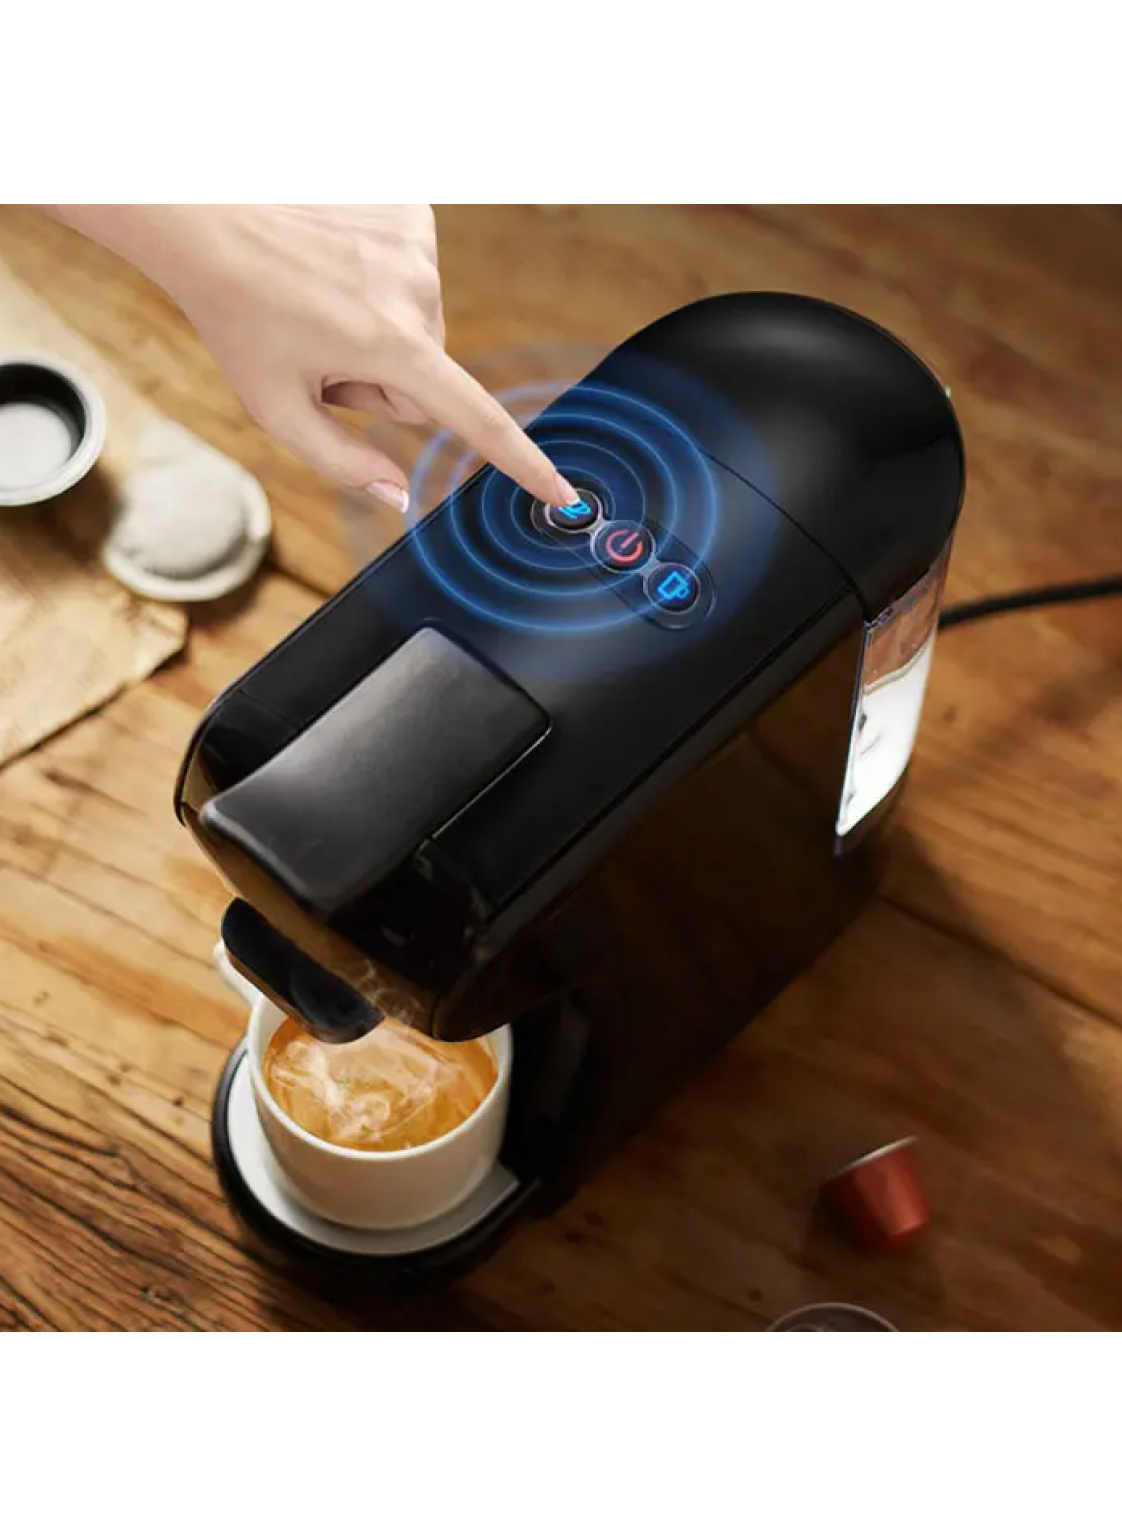 3 in 1 functionality coffee machine